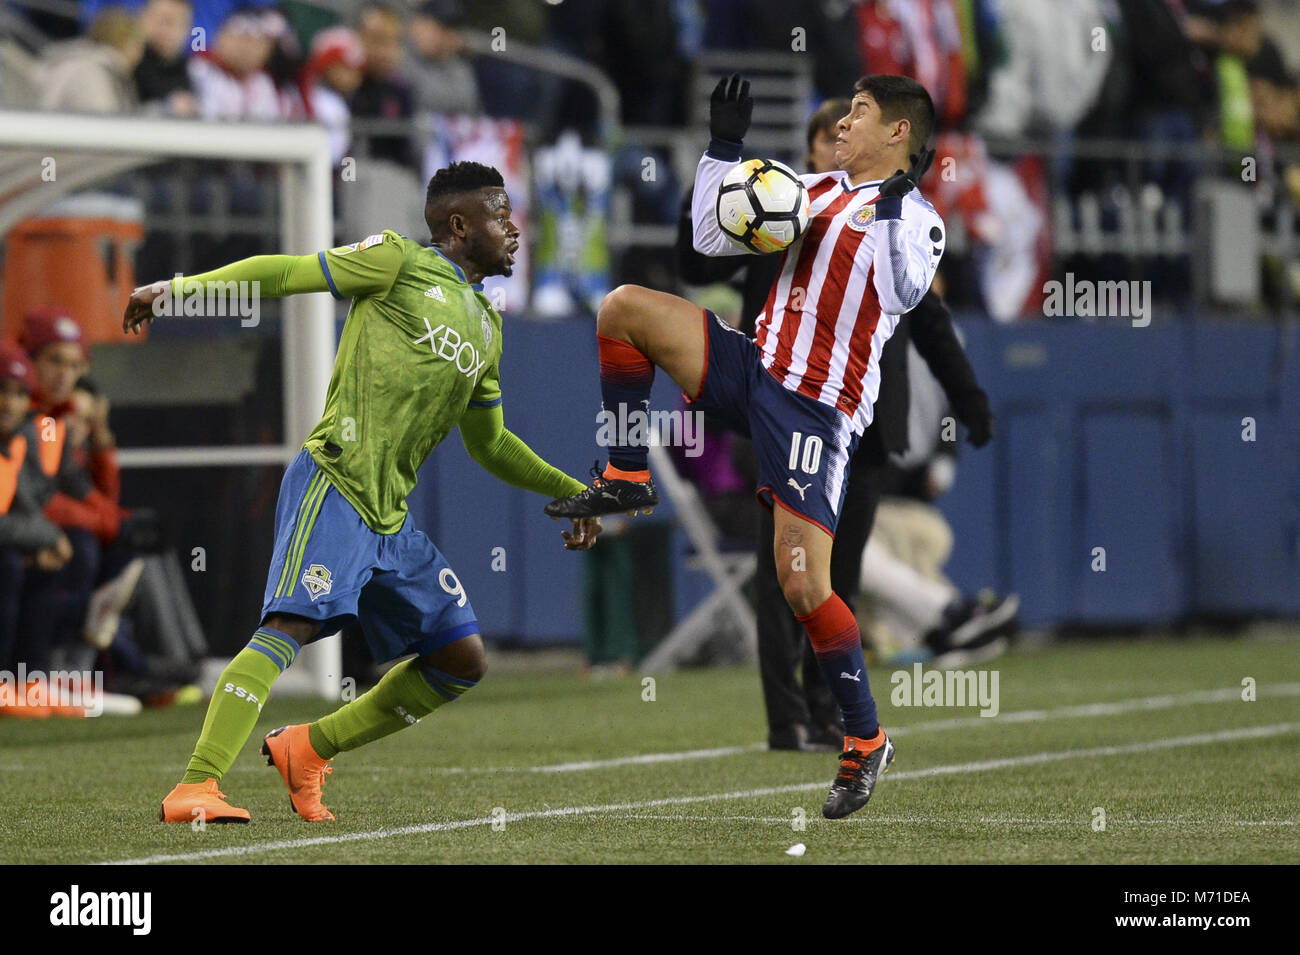 Seattle, Washington, USA. 7th Mar, 2018. CONCACAF Soccer 2018: WAYLON FRANCIS (90) defends against EDUARDO LOPEZ (10) as Chivas Guadalajara visits the Seattle Sounders in a CONCACAF quarterfinal match at Century Link Field in Seattle, WA. Seattle won the match 1-0. Credit: Jeff Halstead/ZUMA Wire/Alamy Live News Stock Photo